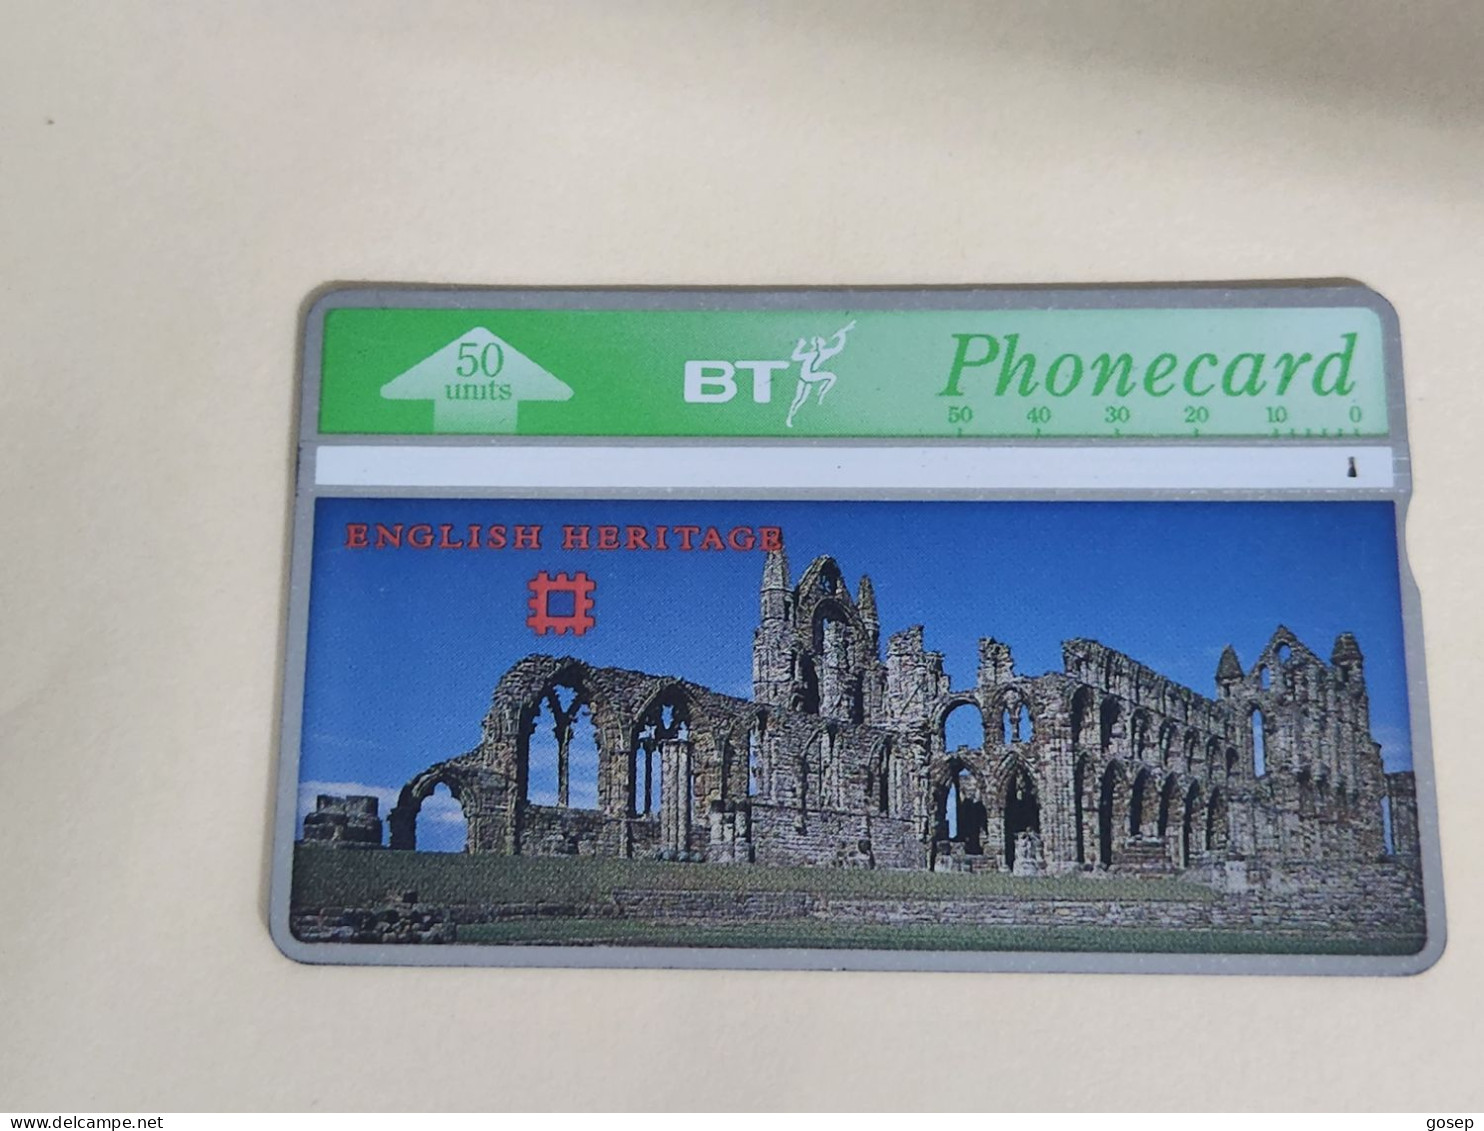 United Kingdom-(BTA112)-HERITAGE-Whitby Abbey-(195)(50units)(528D77140)price Cataloge3.00£-used+1card Prepiad Free - BT Emissions Publicitaires